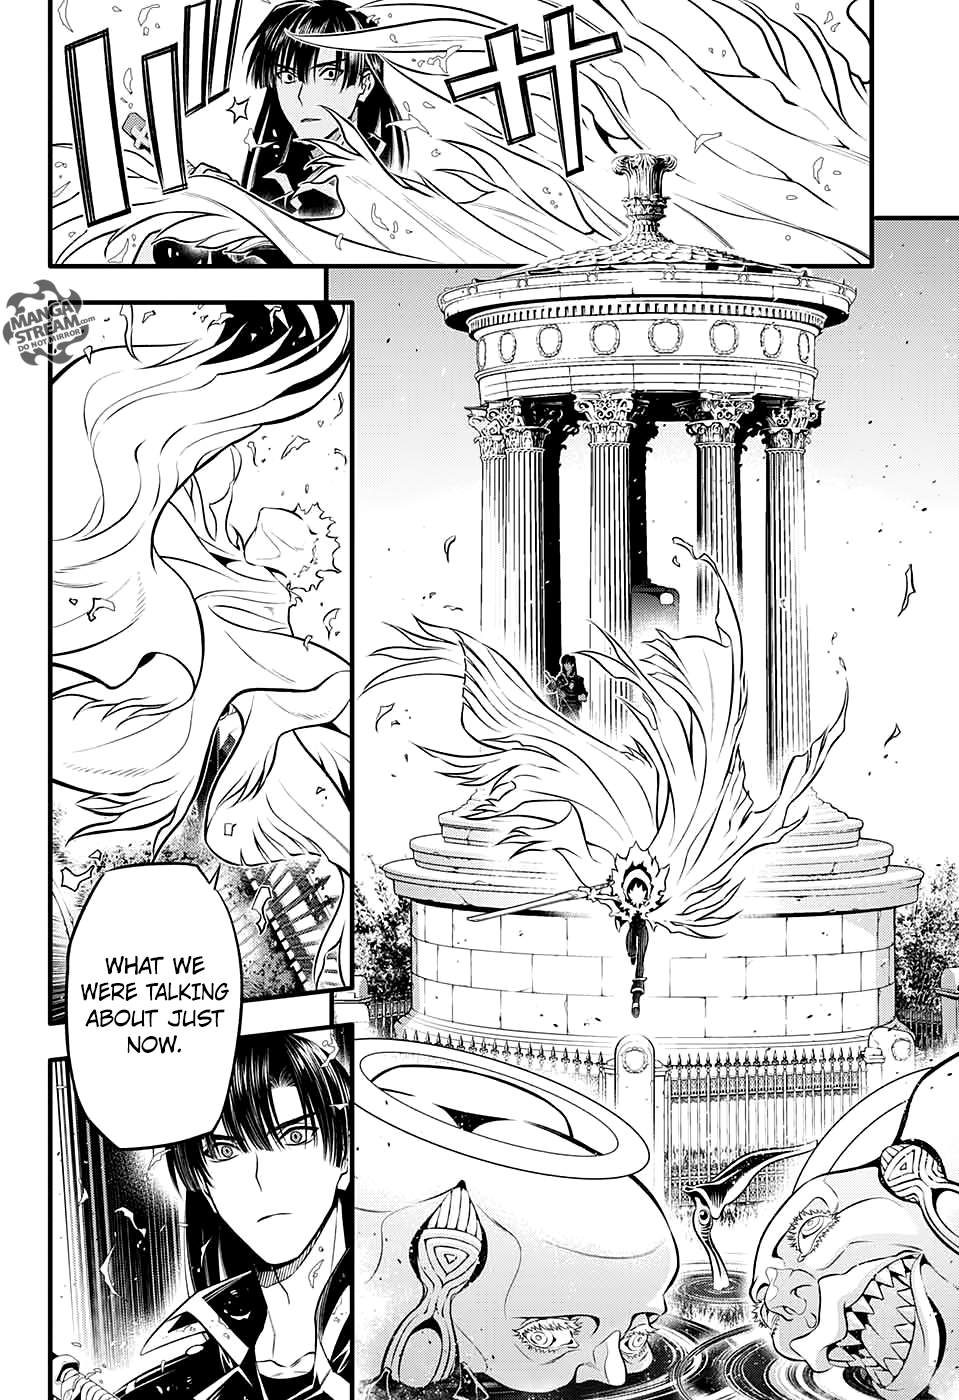 D.Gray-man chapter 231 page 20